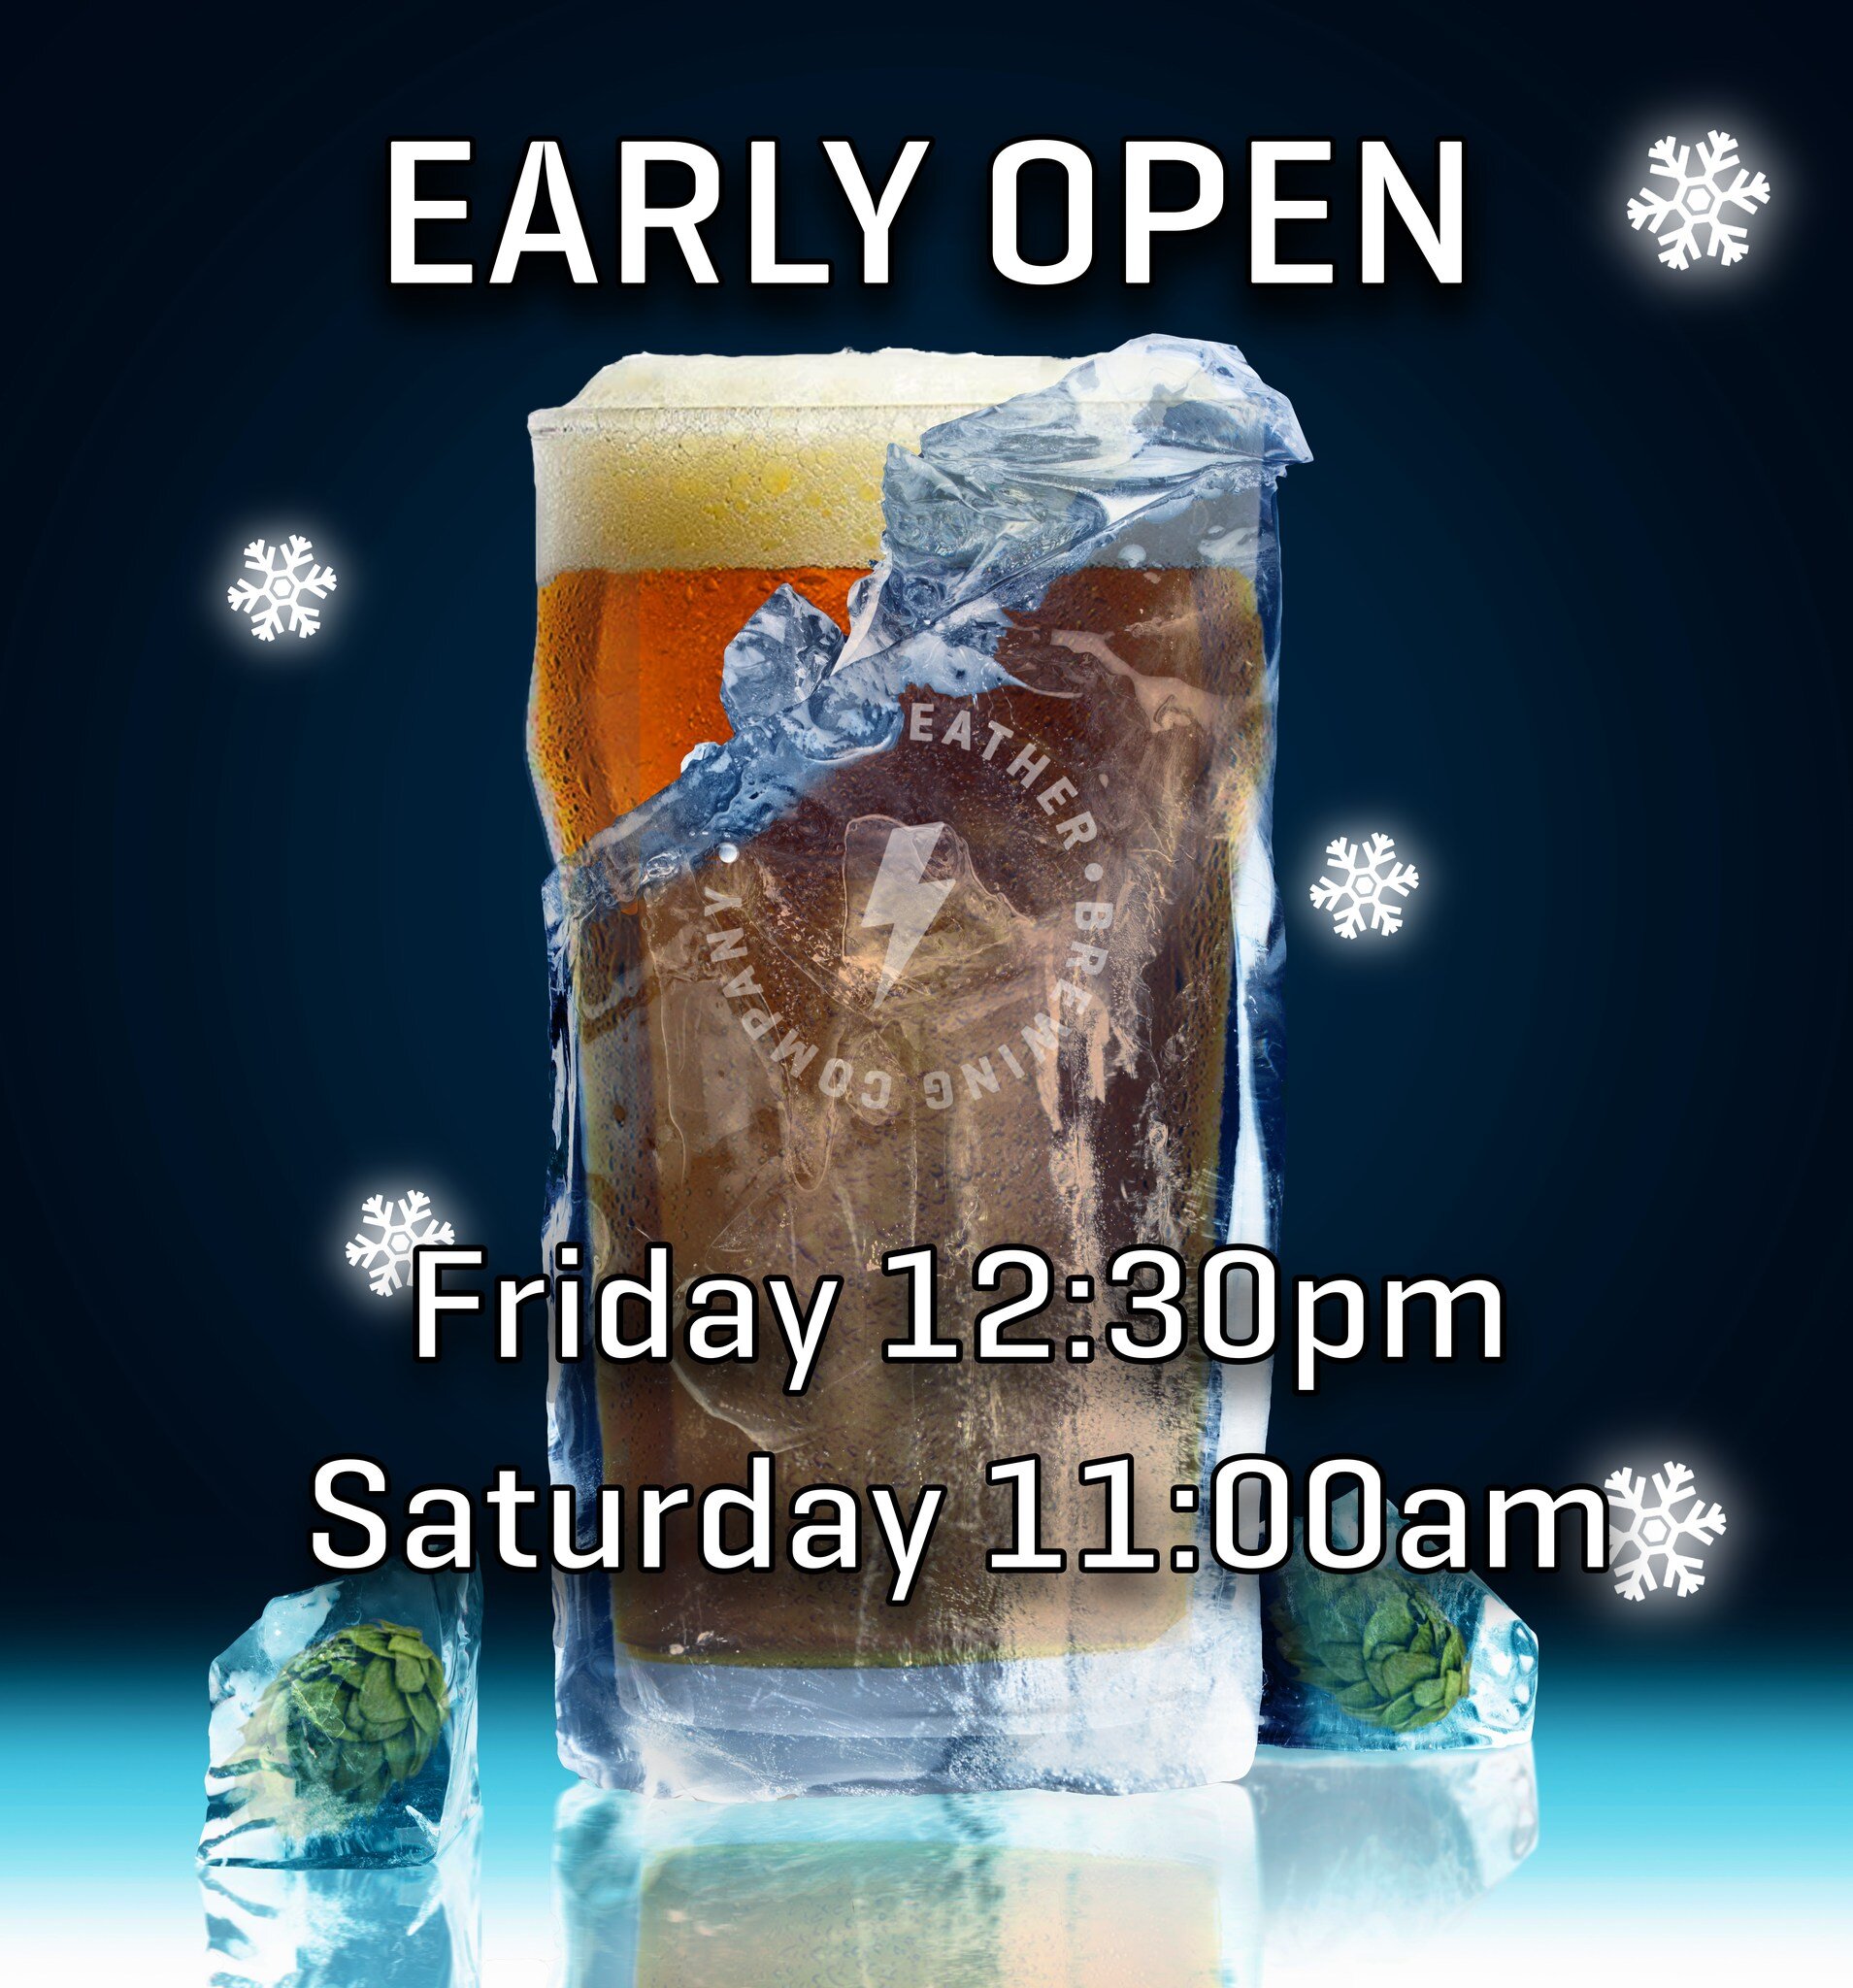 We are opening early this Weekend for the for the Frozen Faceoff! 

Beers will be flowing on Friday at 12:30pm and on Saturday at 11am.